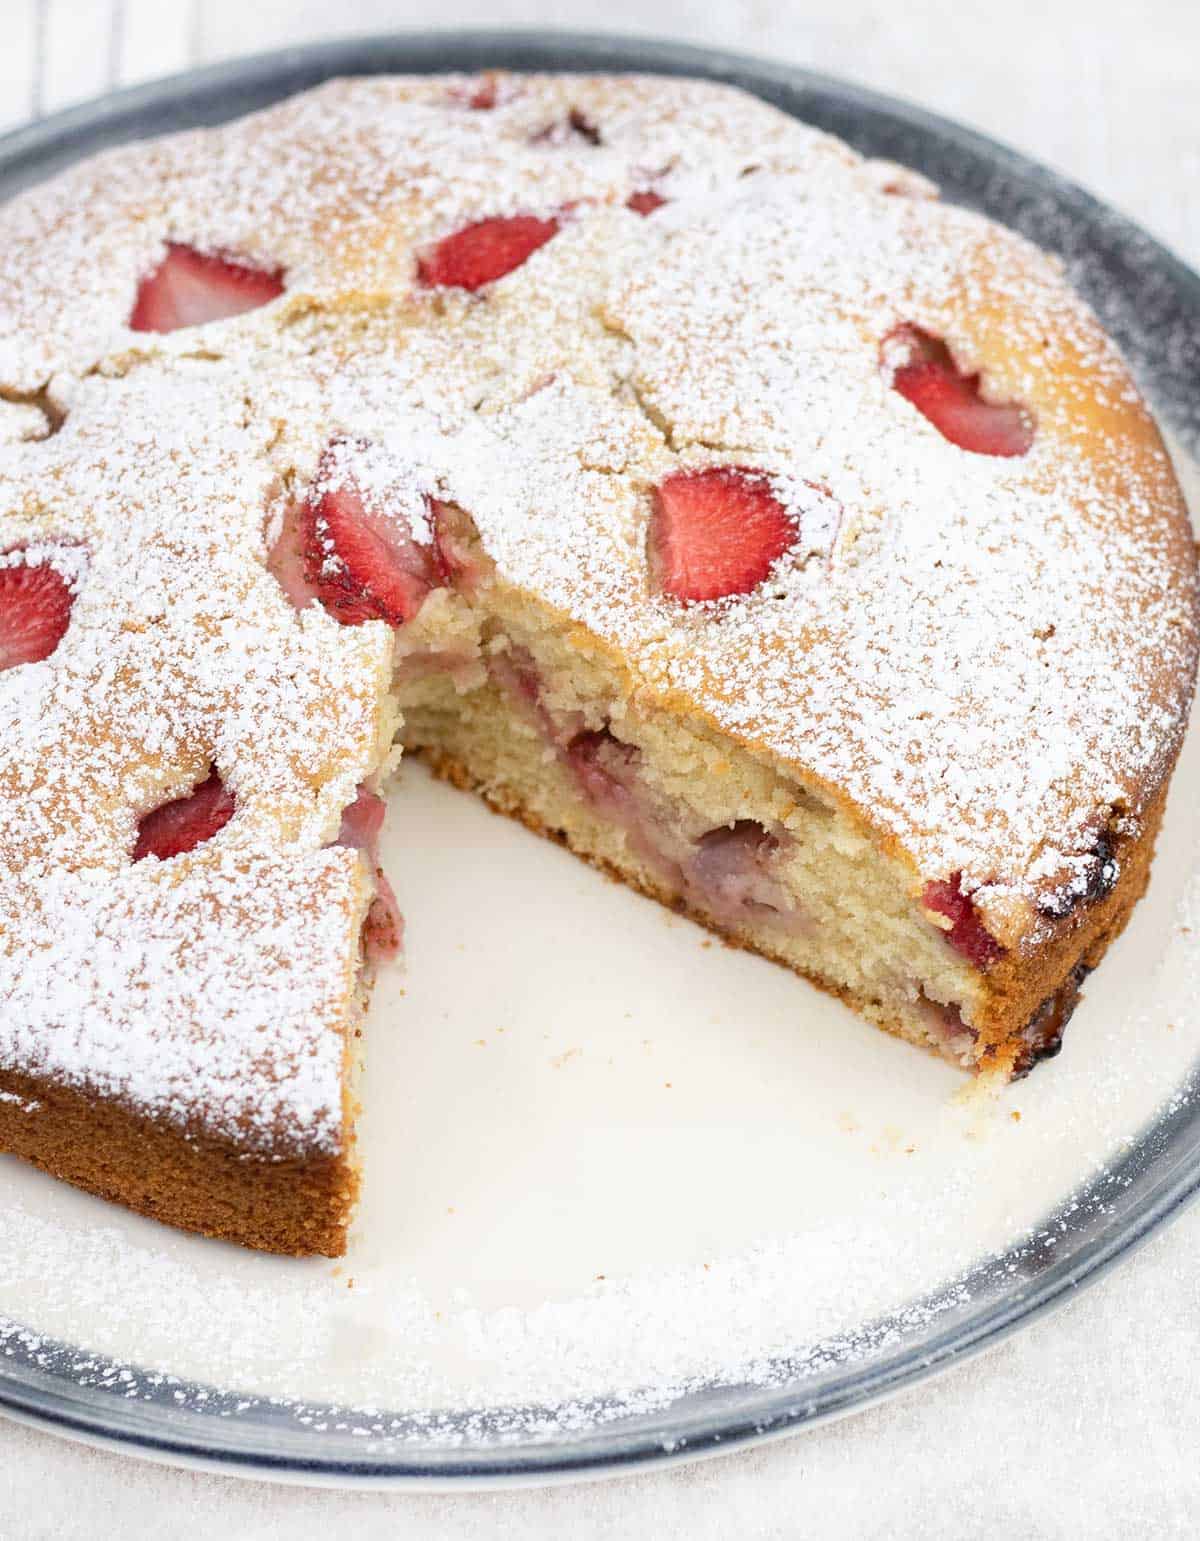 cut the French Strawberry Cake